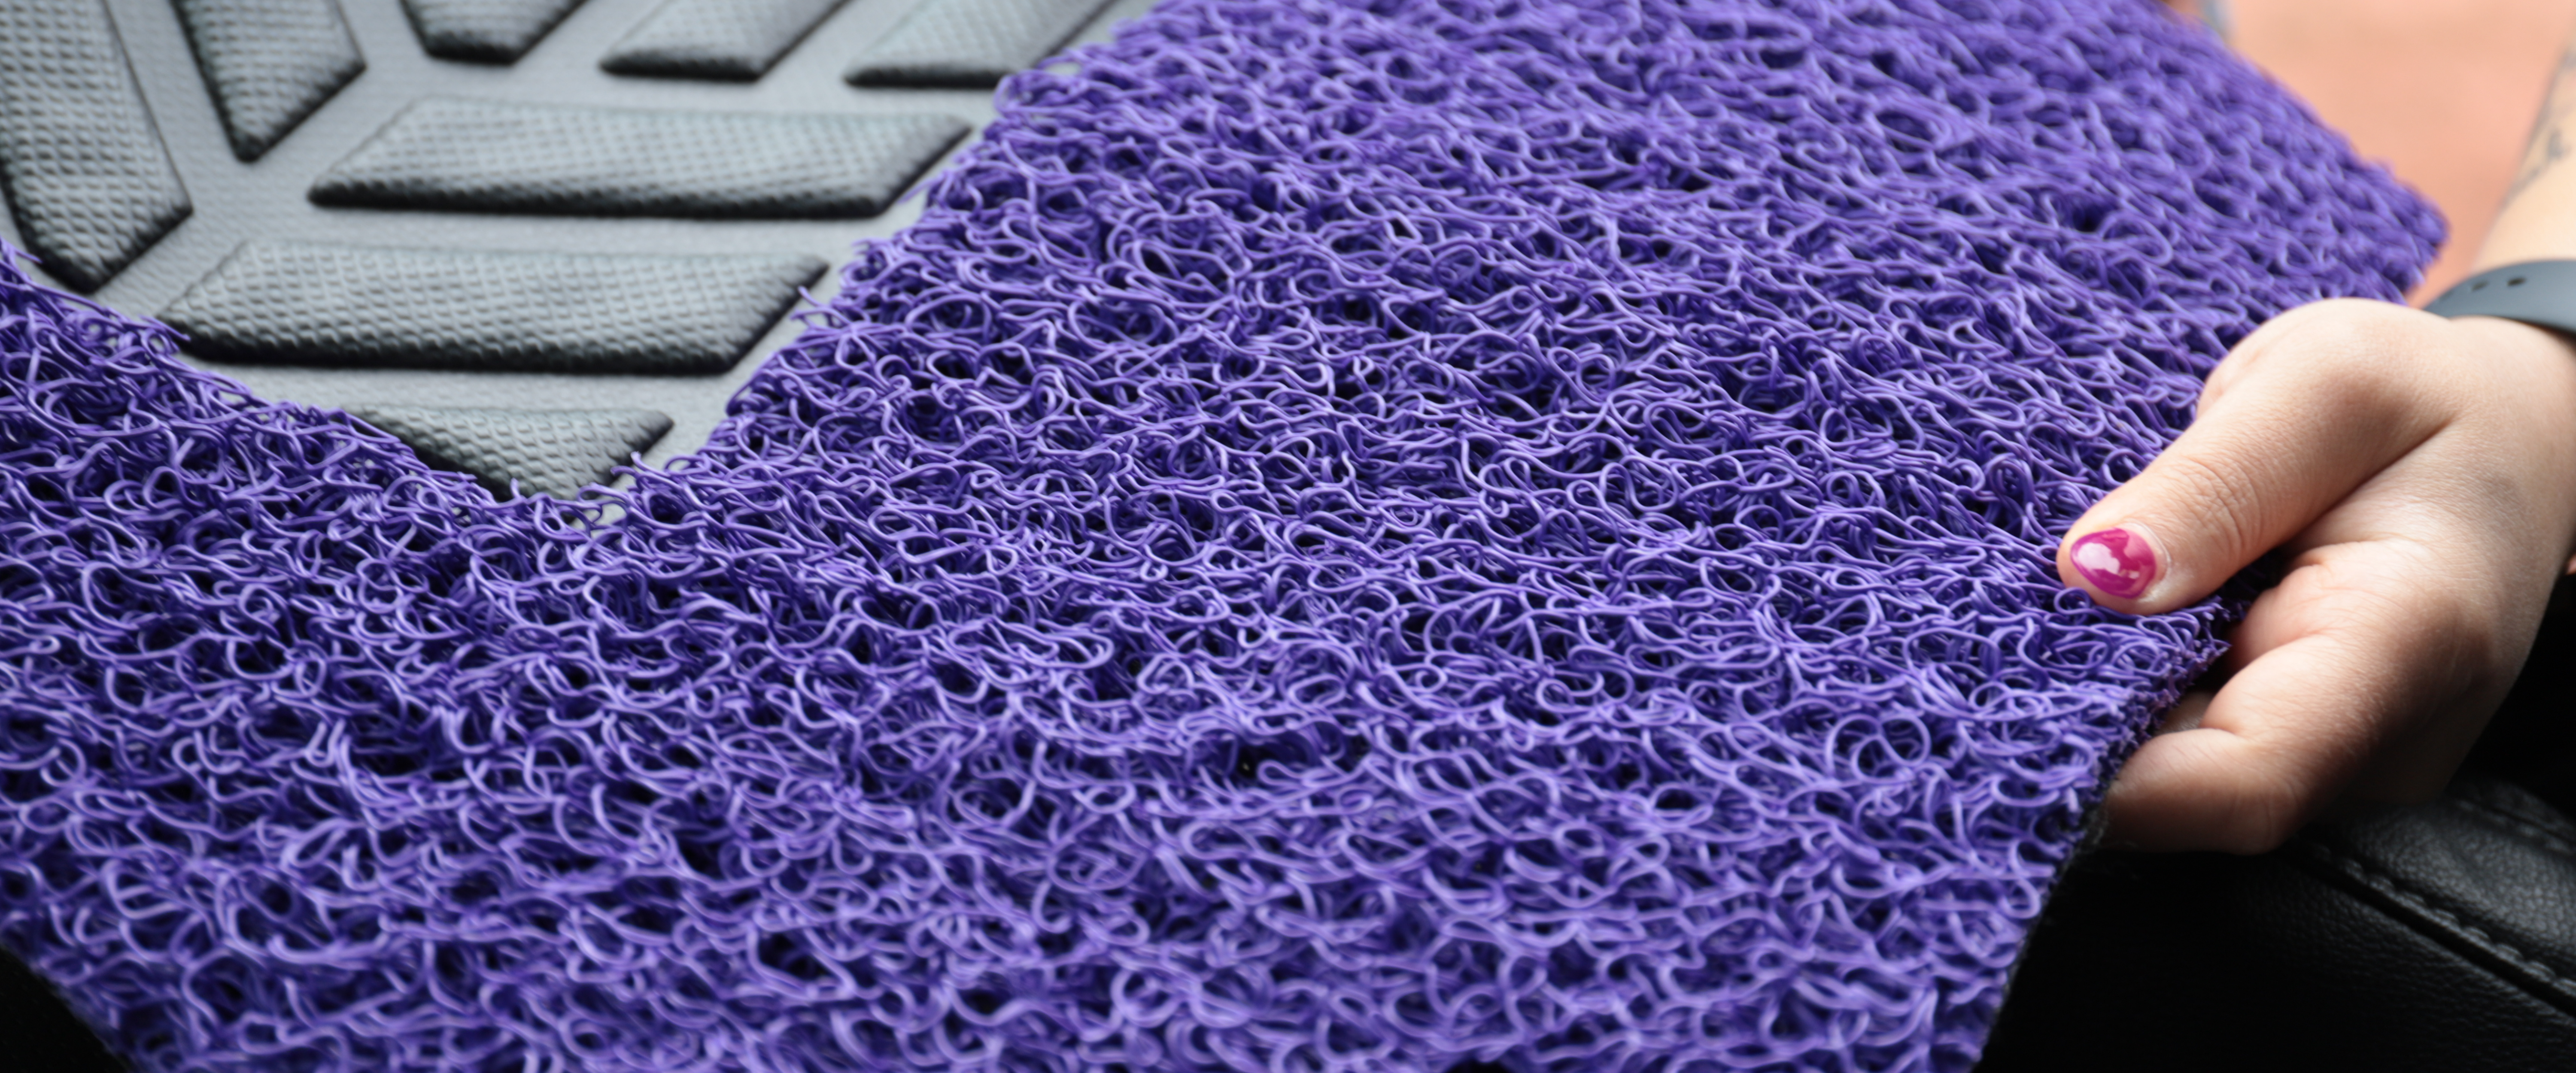 all weather car mats in purple